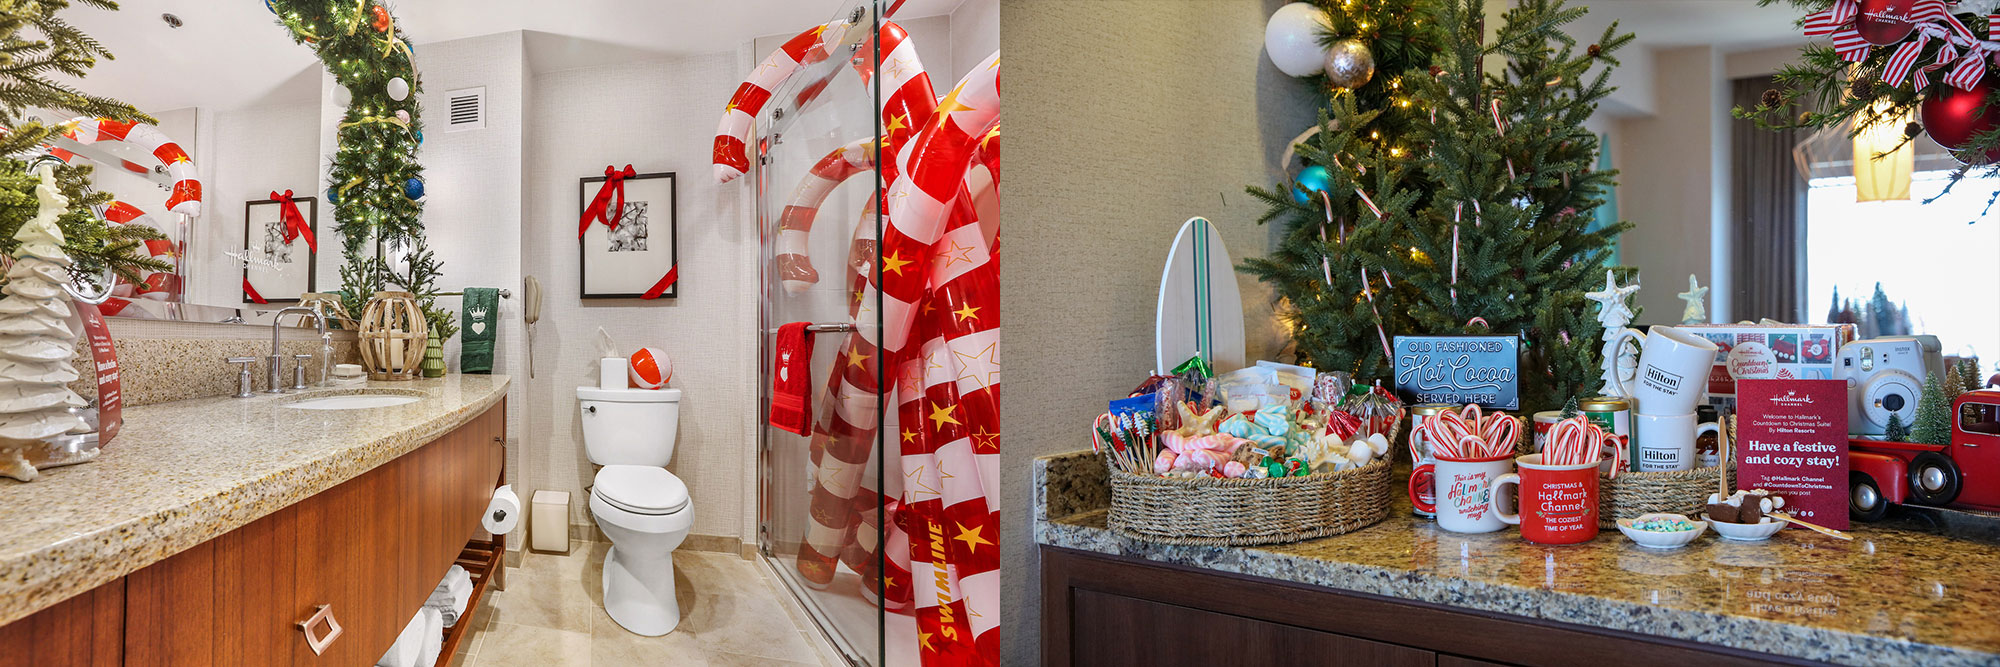 We Tried It: Staying at the Hallmark Channel Holiday Suite in NYC